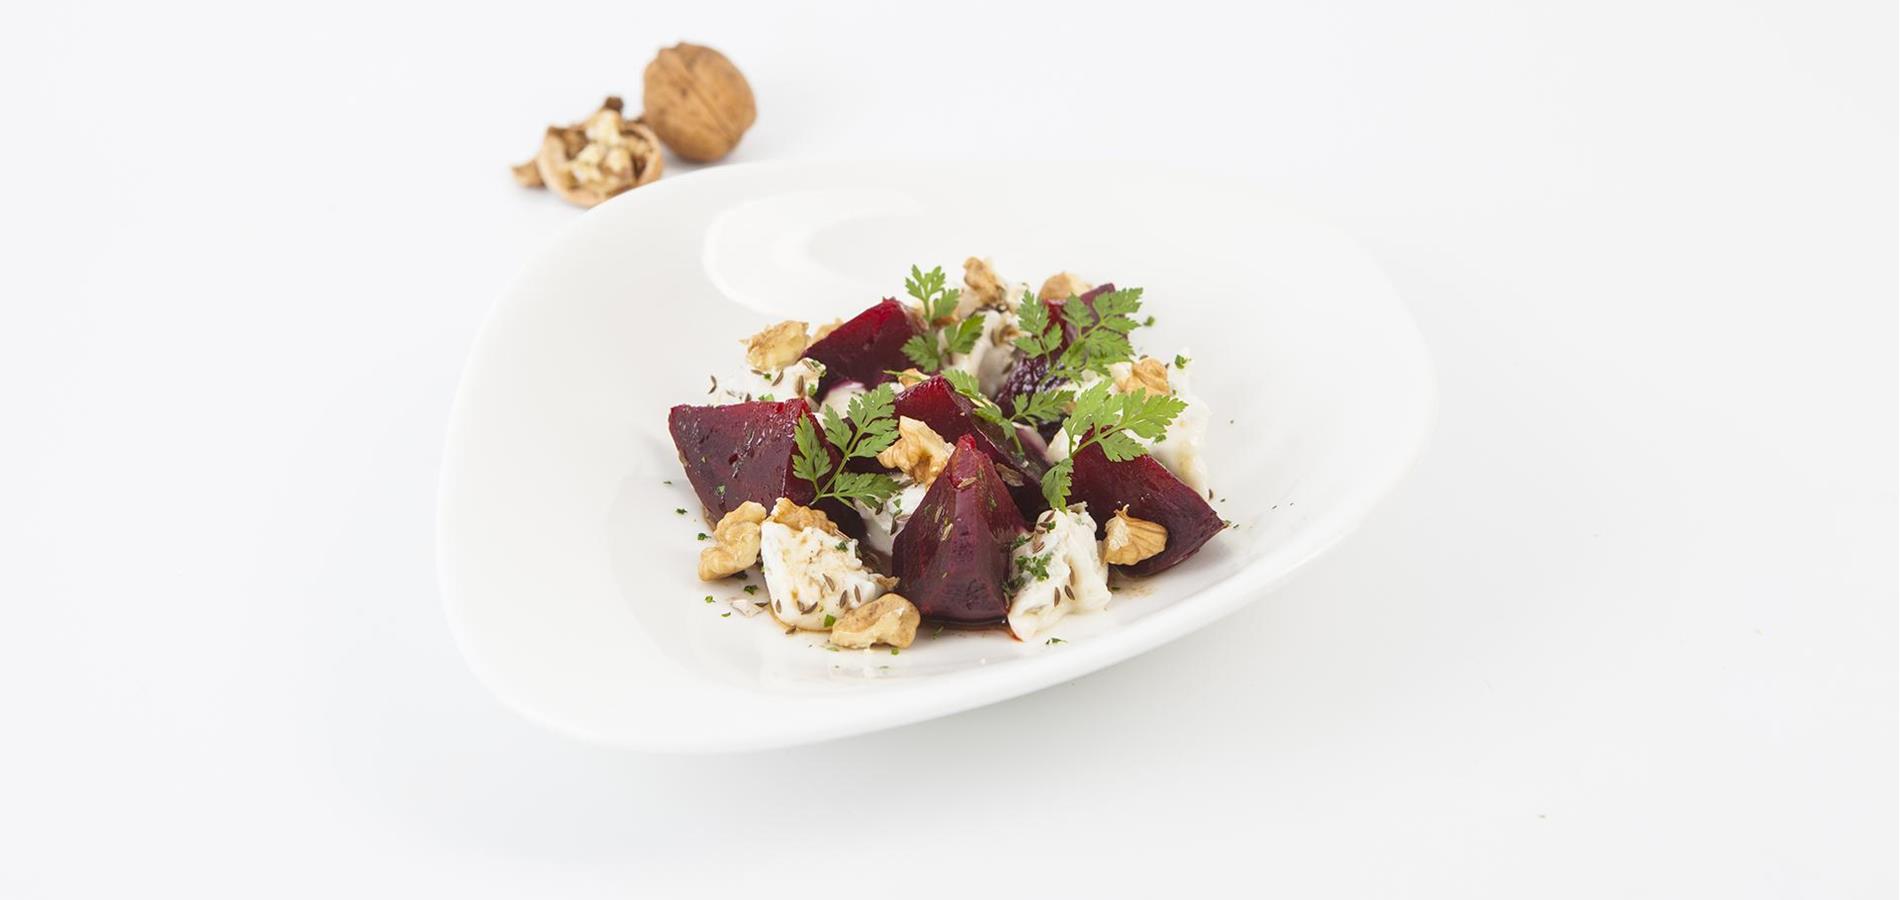 Beetroots with burrata and walnuts